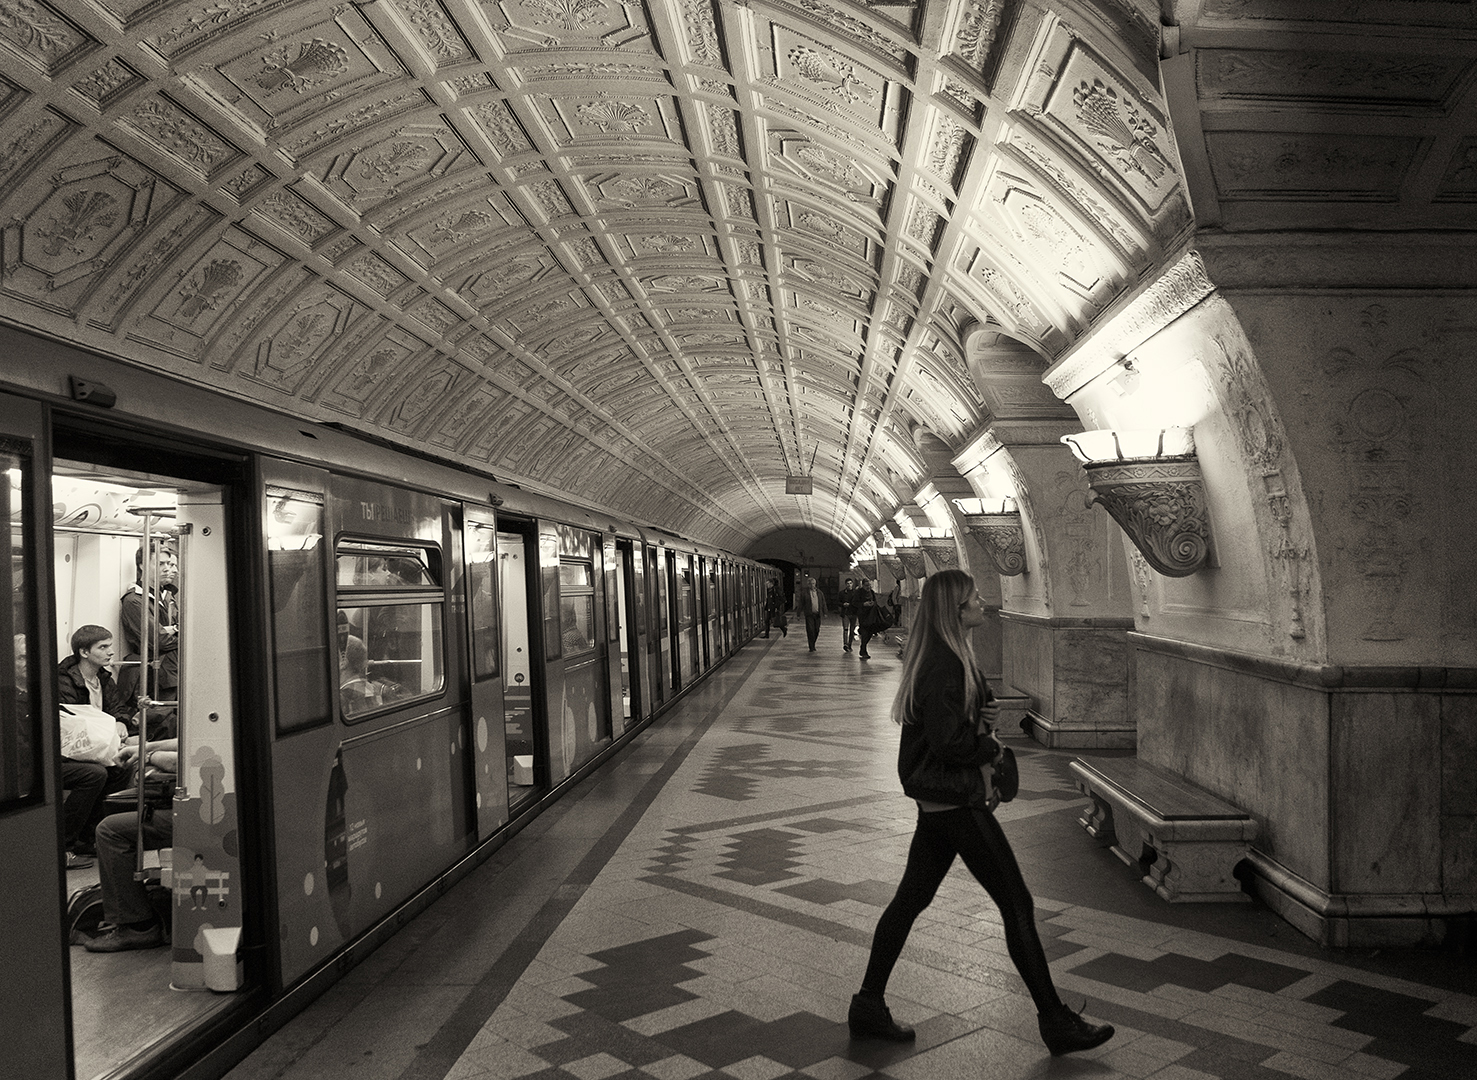  Moscow subway   